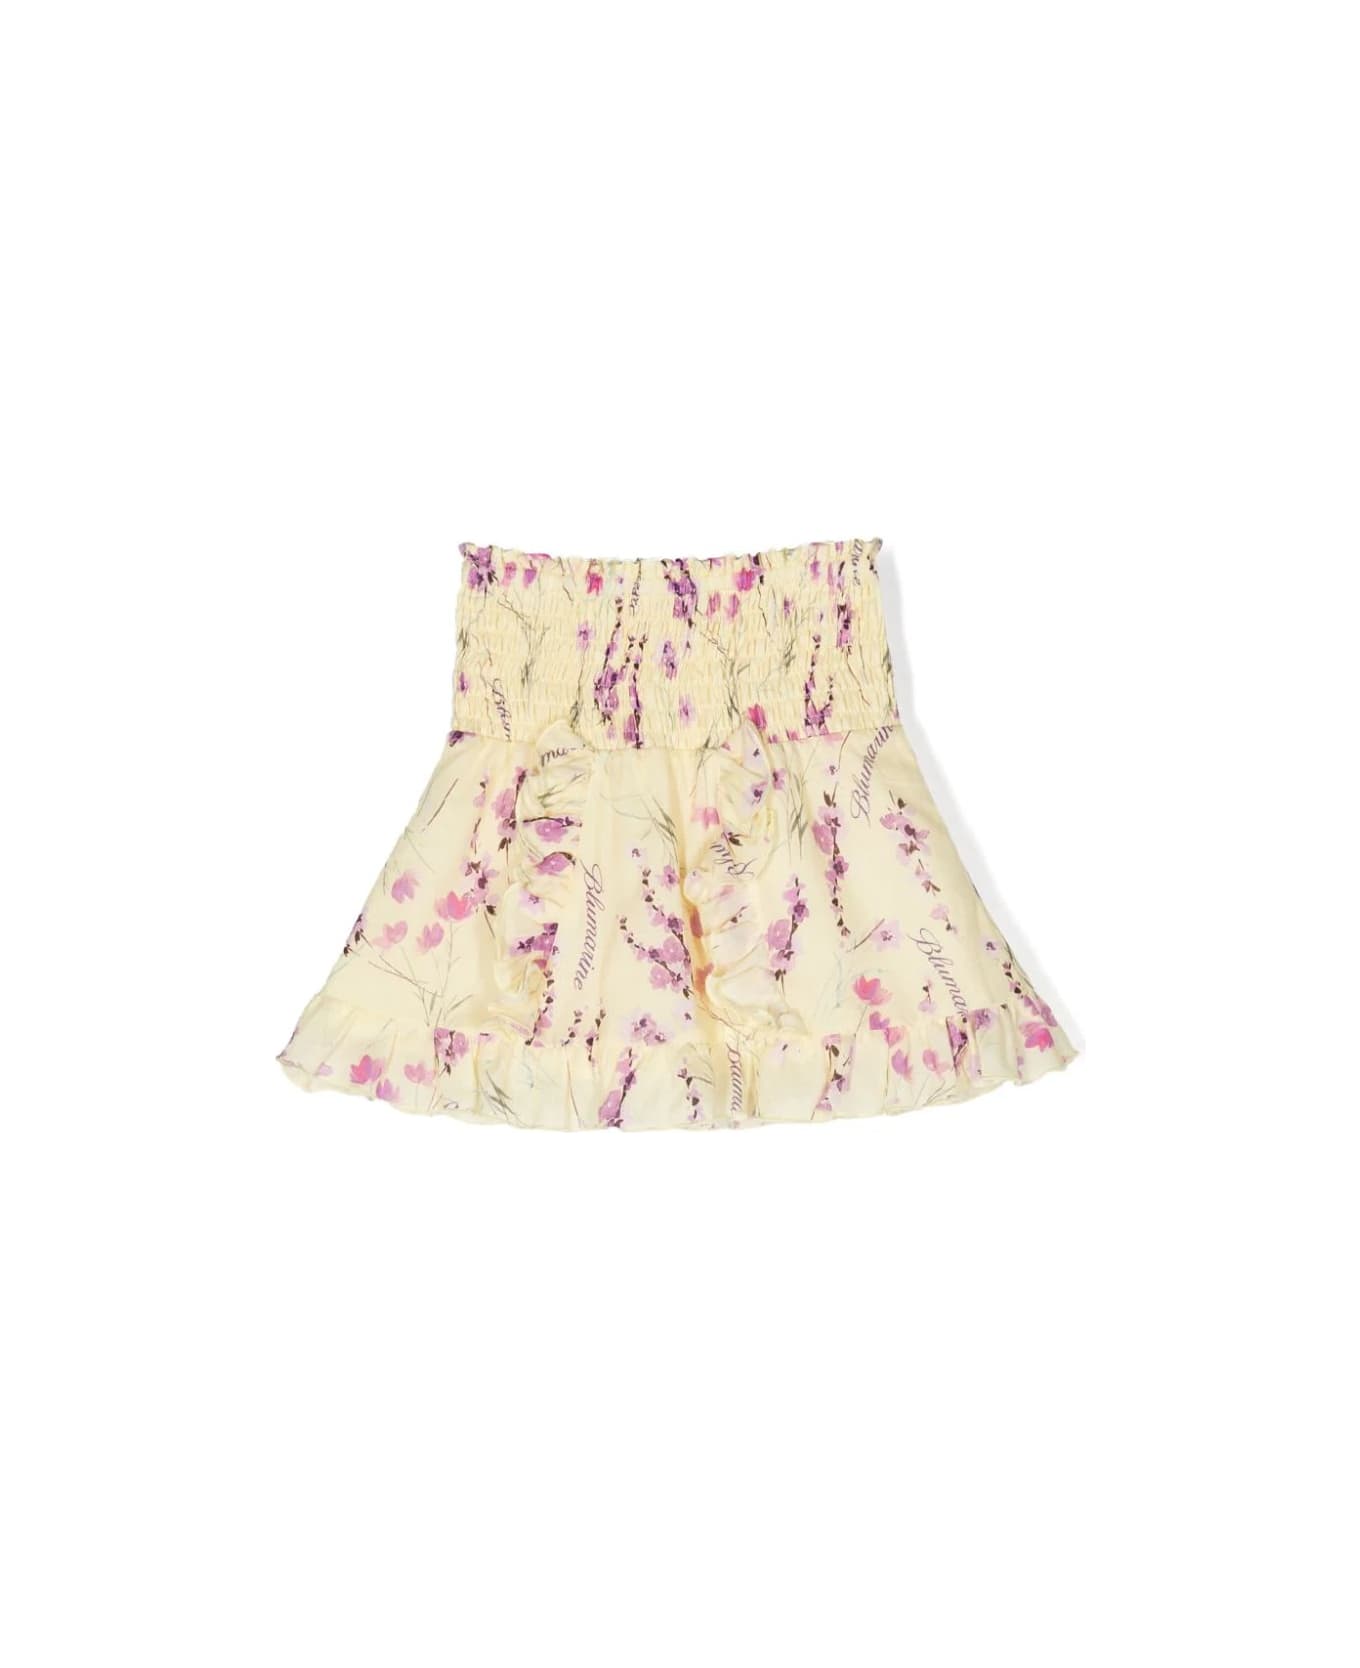 Miss Blumarine Pastel Yellow Miniskirt With Ruffles And Floral Print - Giallo ボトムス